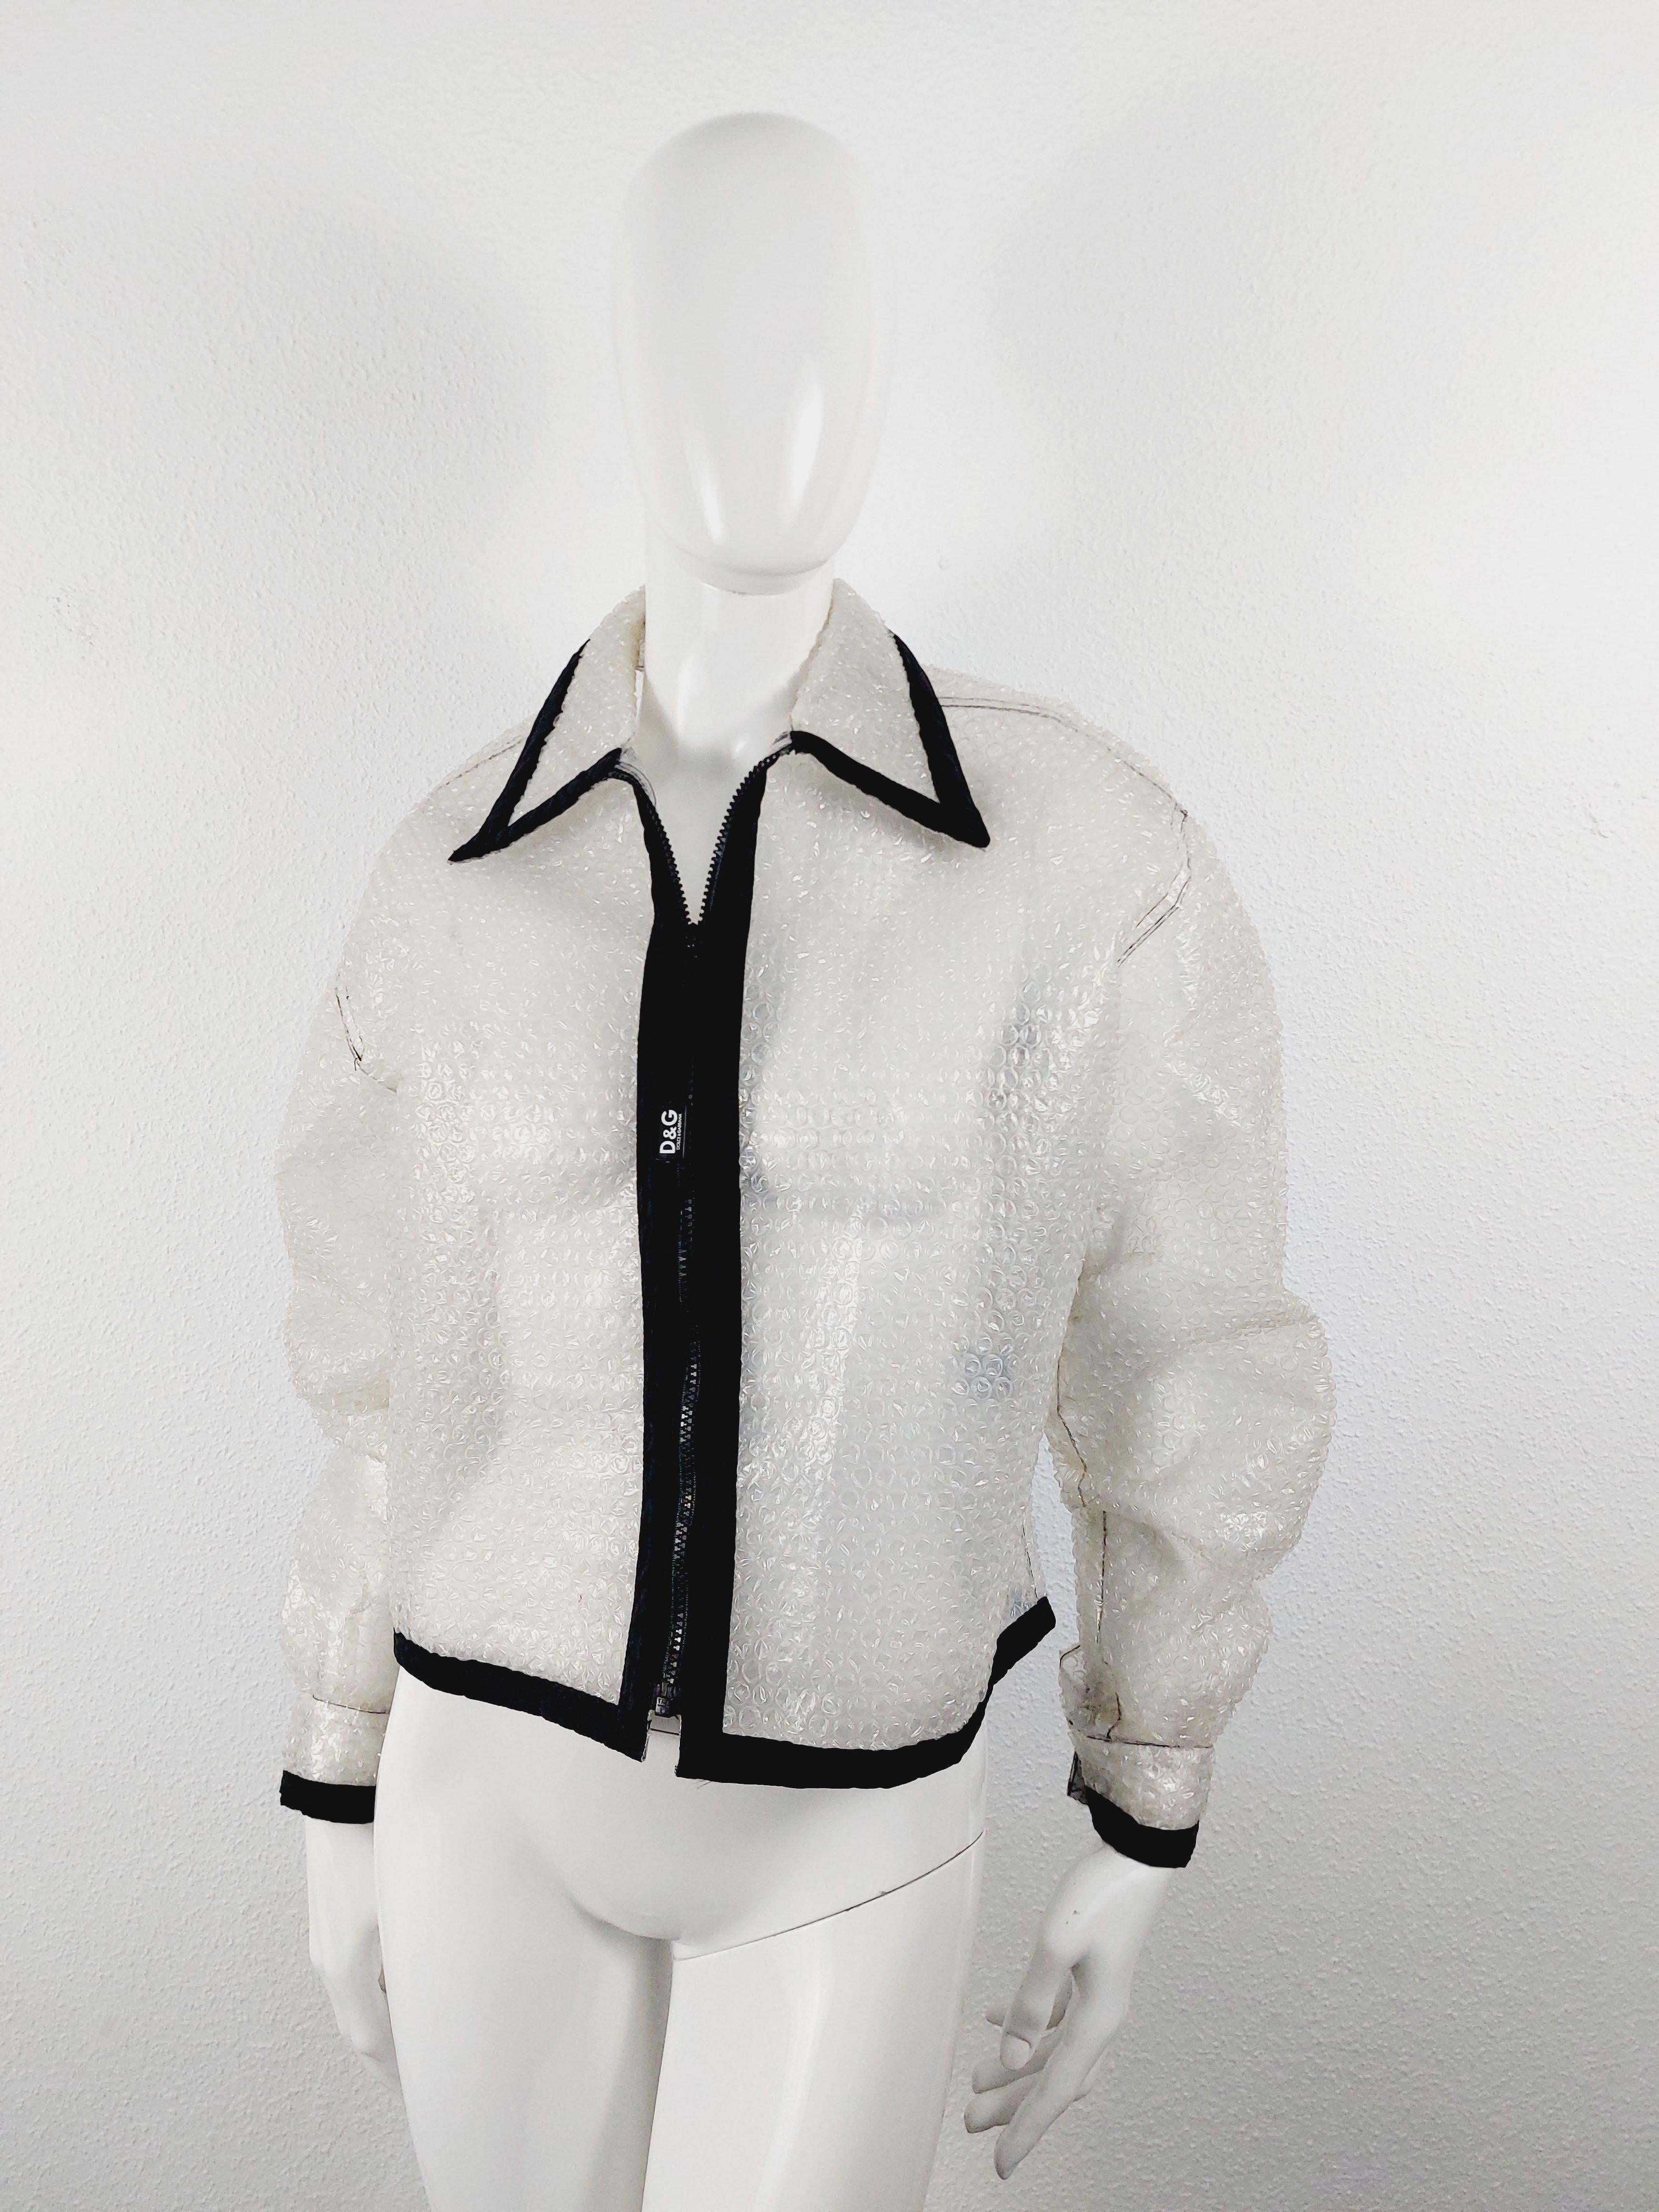 1990's D&G by Dolce & Gabbana Clear Plastic Bubble Wrap Runway Jacket Coat
I’ve never seen anything quite like this. It is a rain jacket that is made out of bubble wrap. The kind that you use for packing goods. The jacket is an IT size 34/48 and has